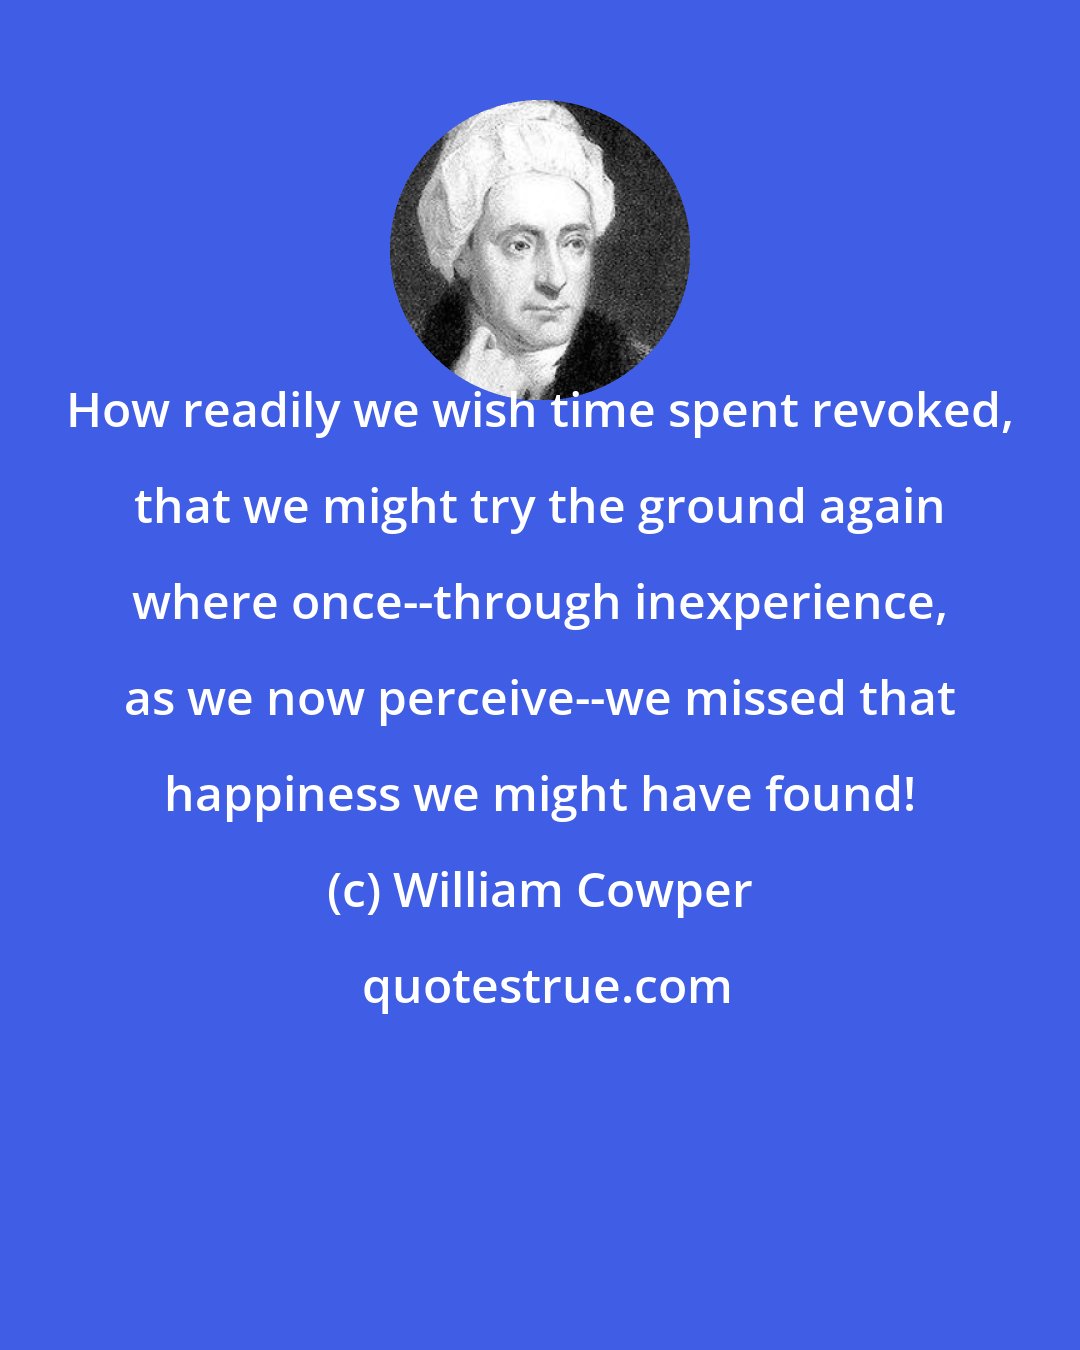 William Cowper: How readily we wish time spent revoked, that we might try the ground again where once--through inexperience, as we now perceive--we missed that happiness we might have found!